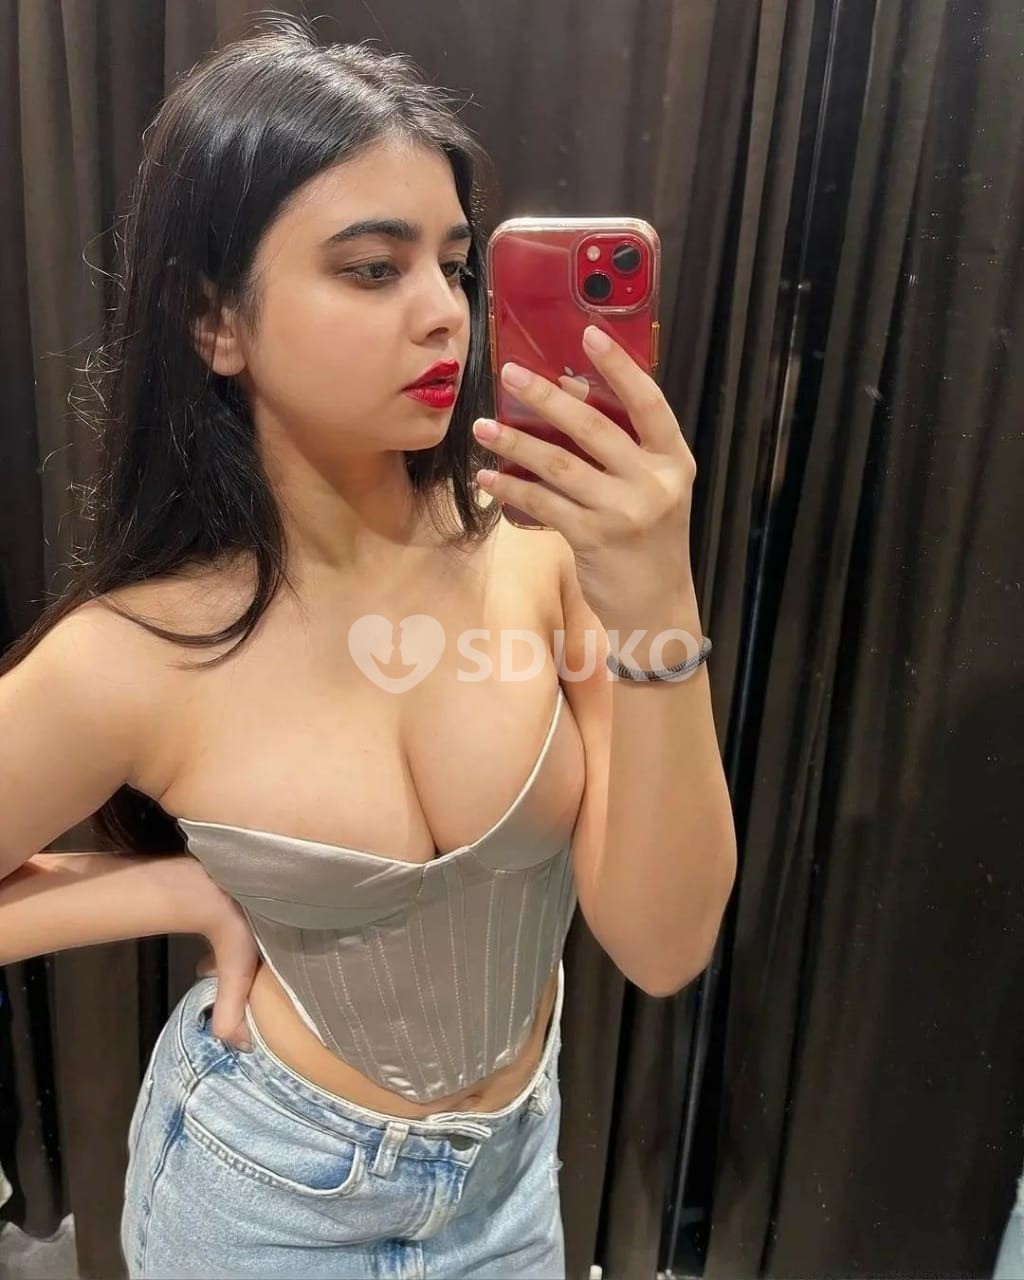 KATRAJ 🌛!VIP TODAY LOW PRICE ESCORT 🥰SERVICE 100% SAFE AND SECURE ANYTIME CALL ME 24 X 7 SERVICE AVAILABLE 100% SA